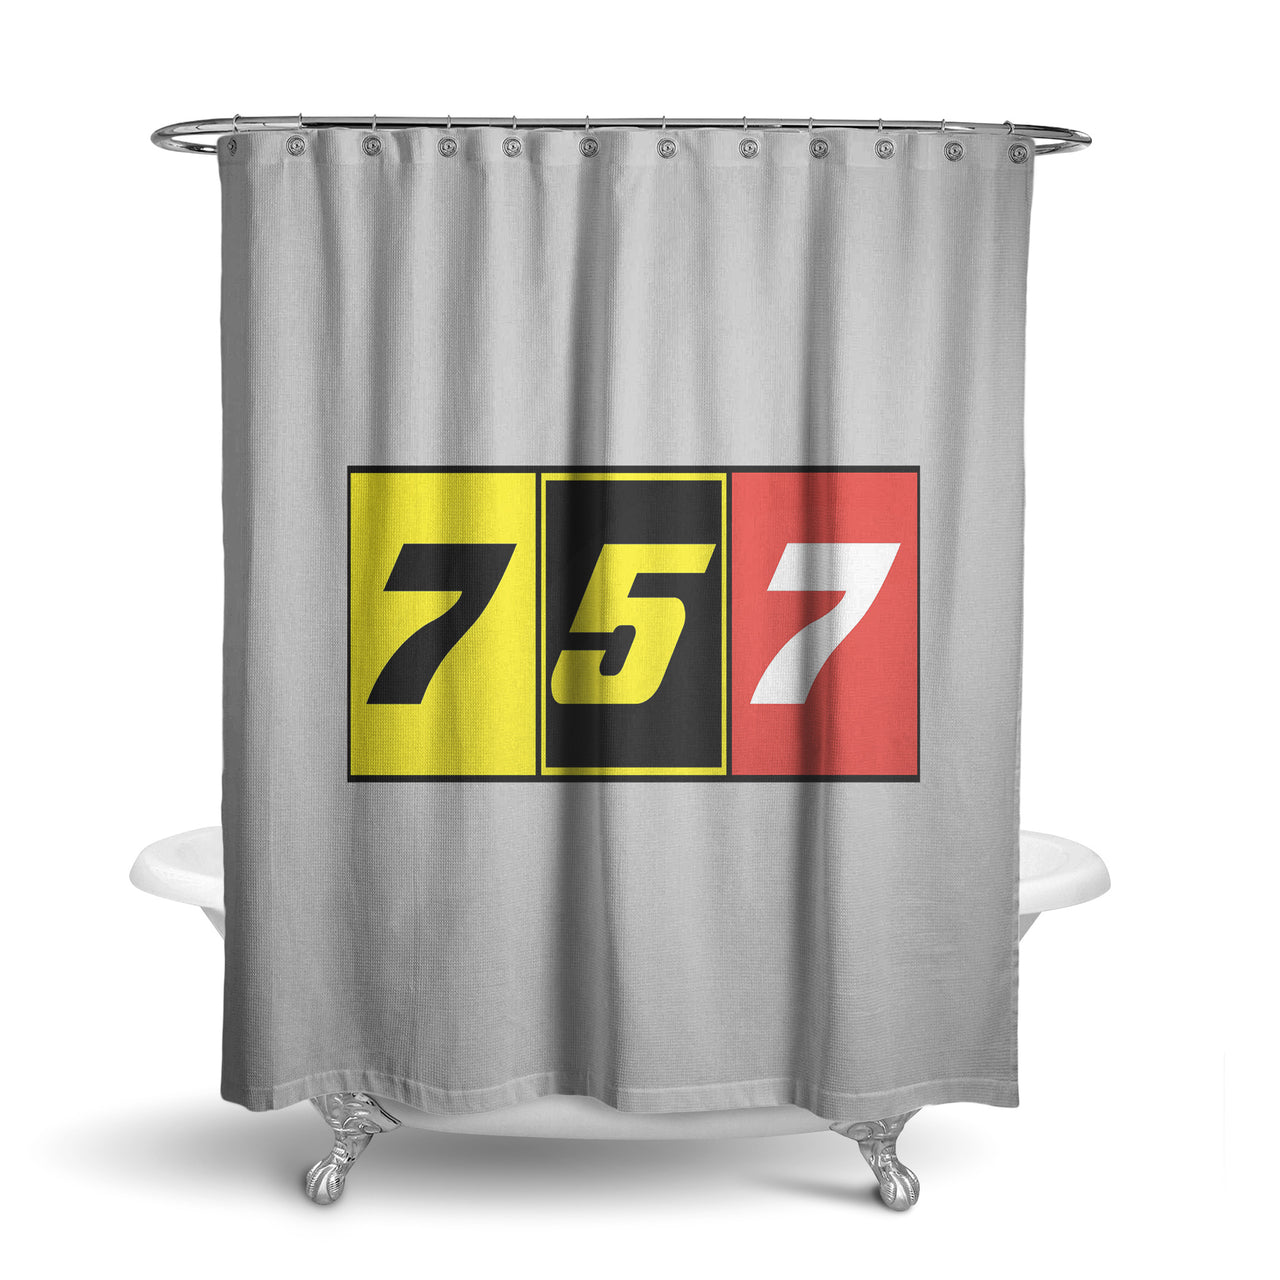 Flat Colourful 757 Designed Shower Curtains